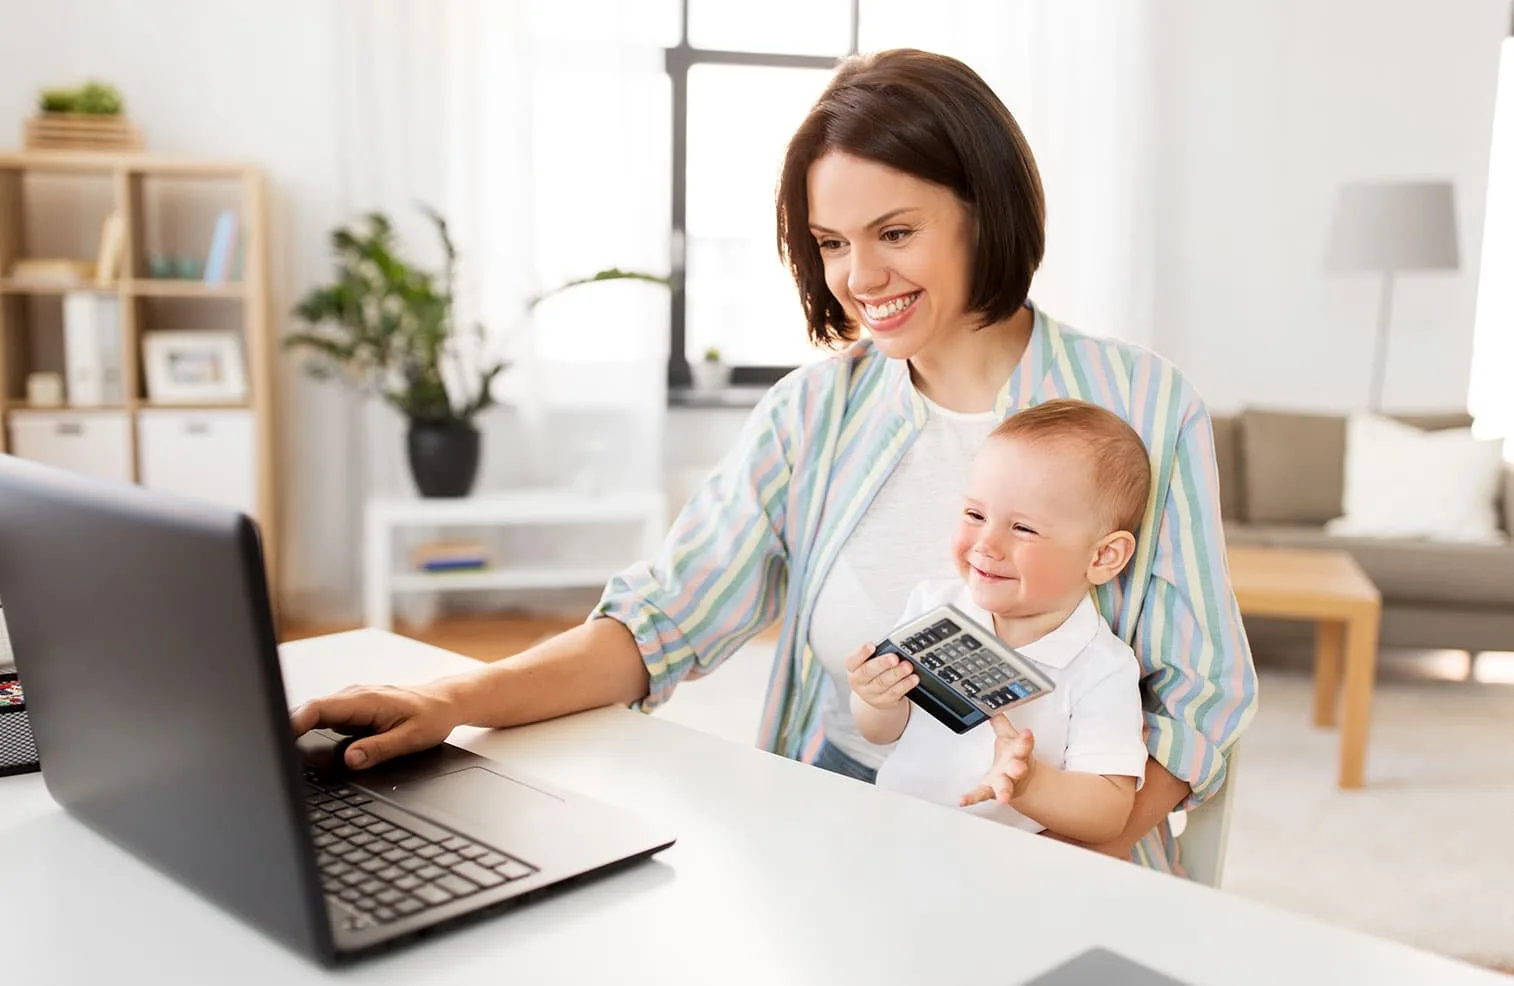 Working from home certainly has its perks and may seem like a dream situation, but working at home does have its challenges, especially if you have kids. Here are 7 challenges of working at home with kids and our best tips on how to overcome them!